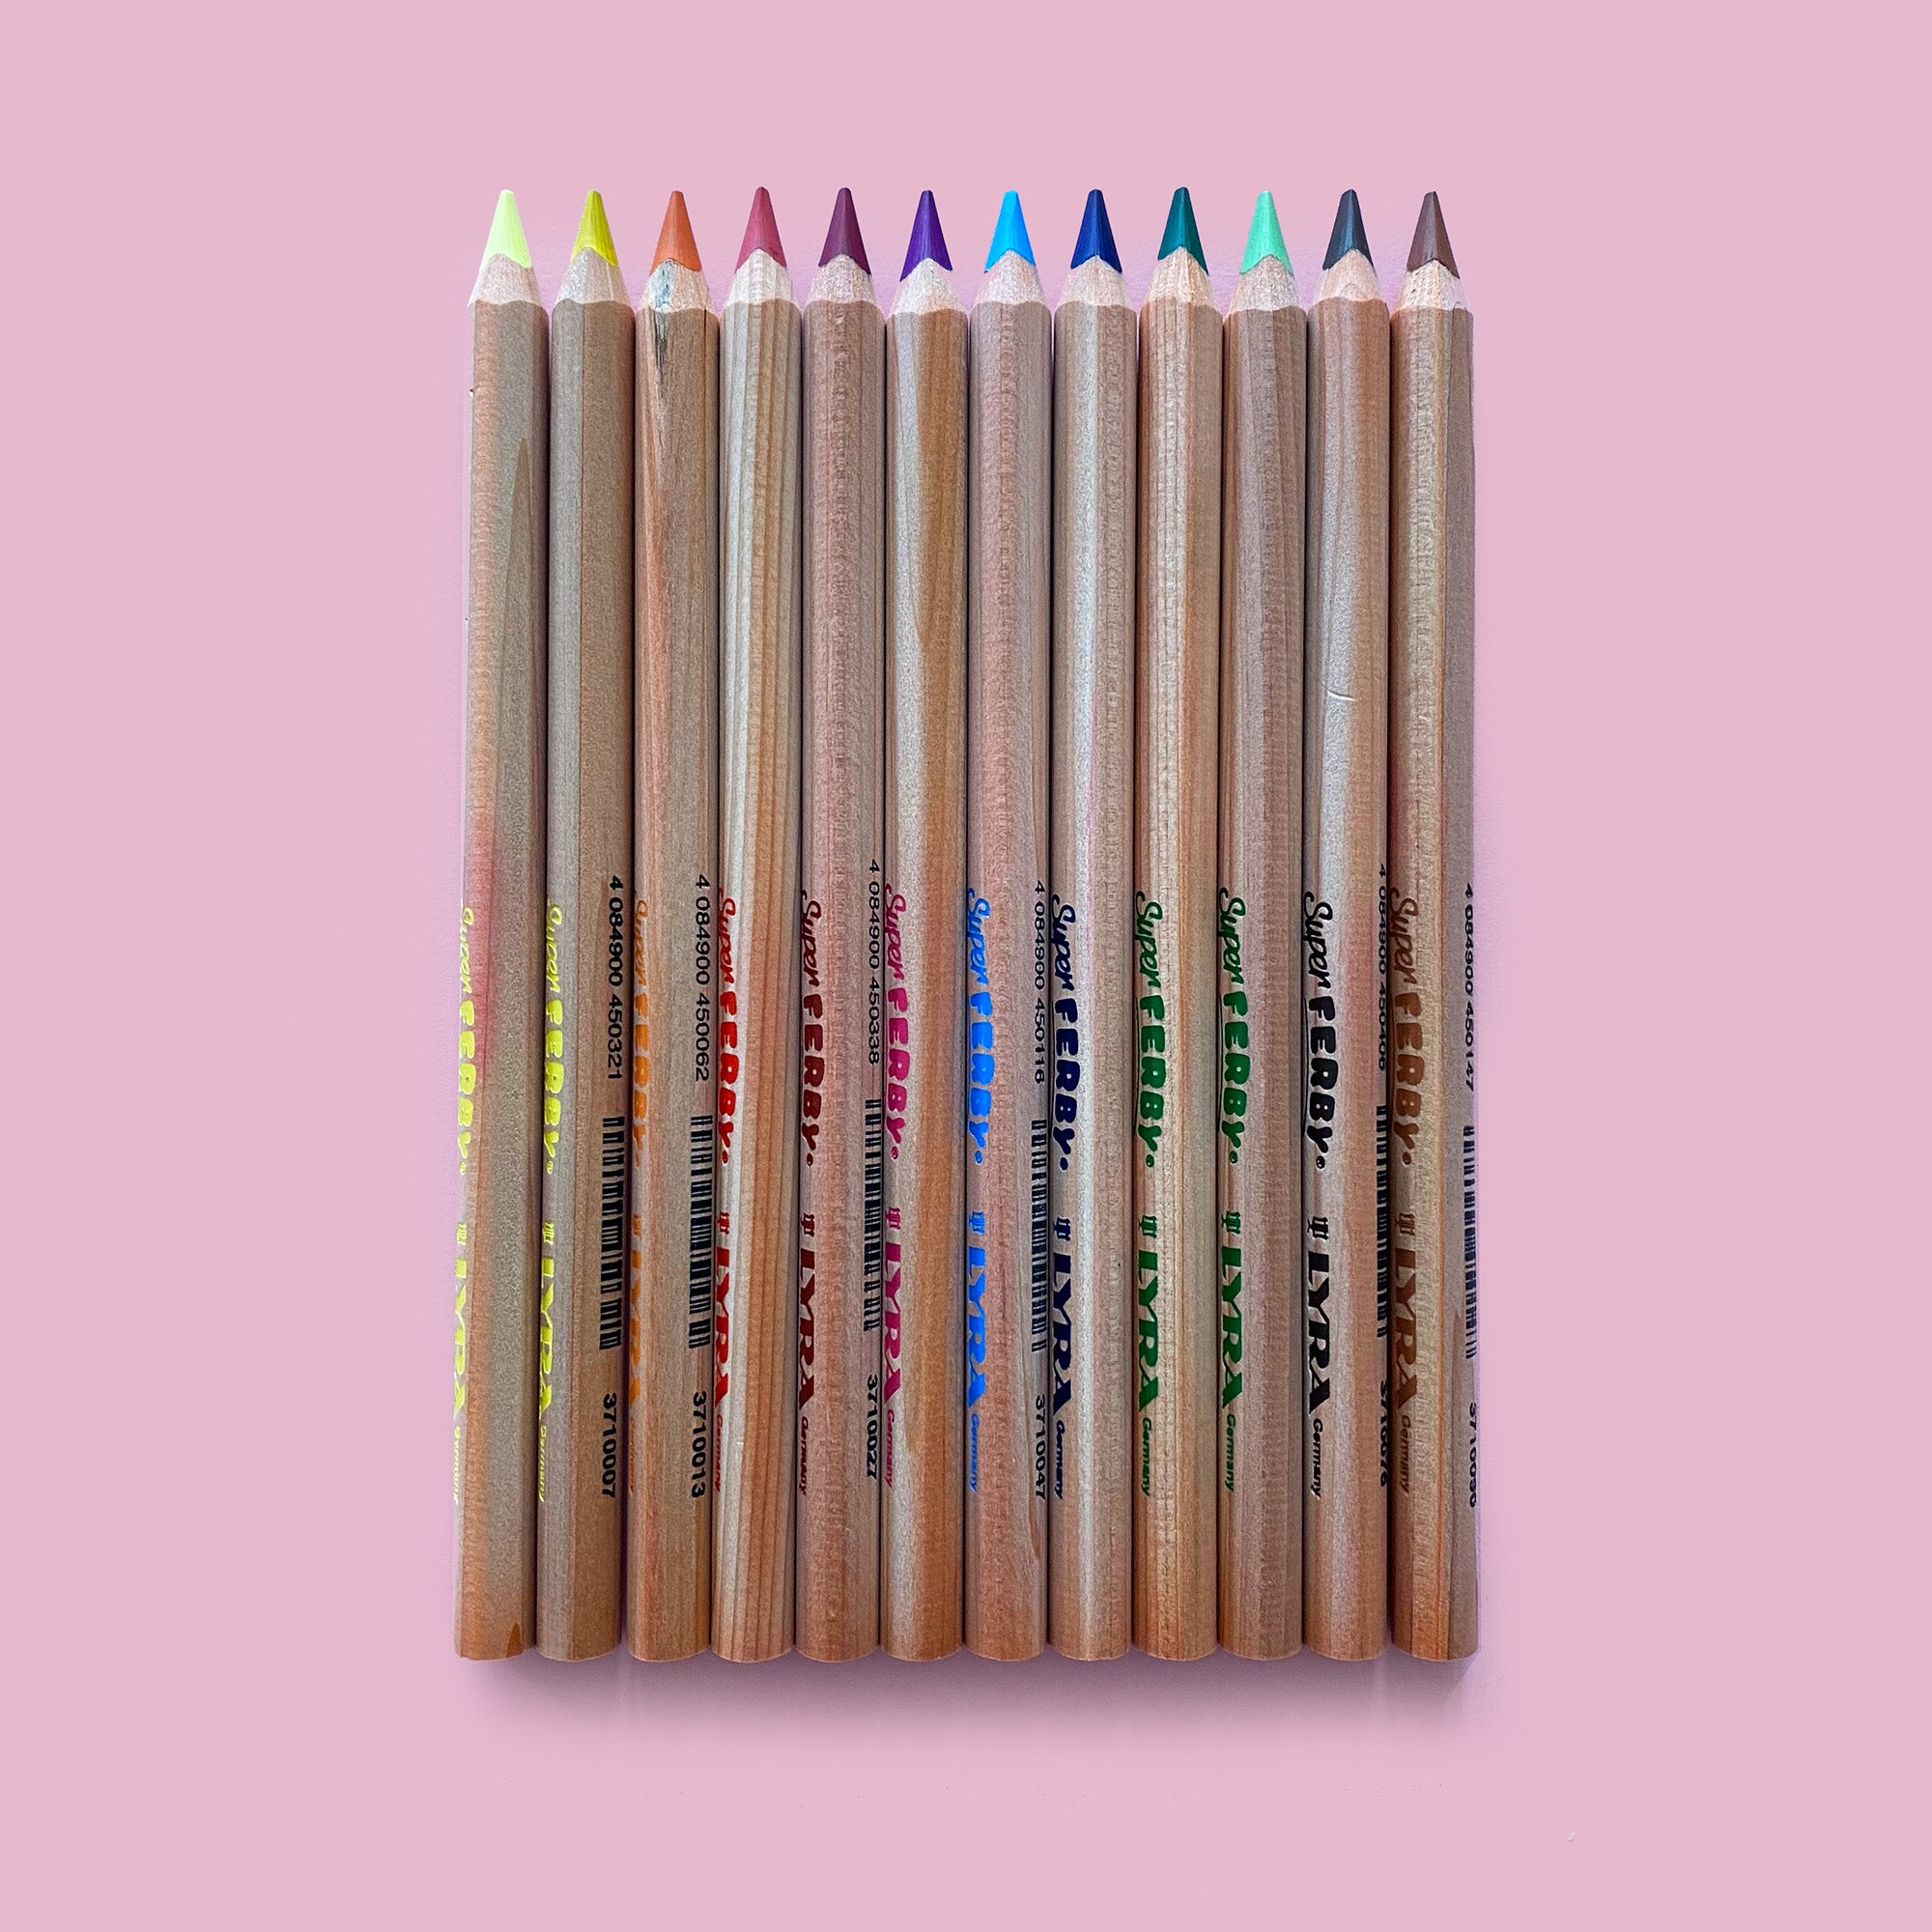 Lyra Waldorf Selection Super Ferby Colored Pencil Assortments (FG6